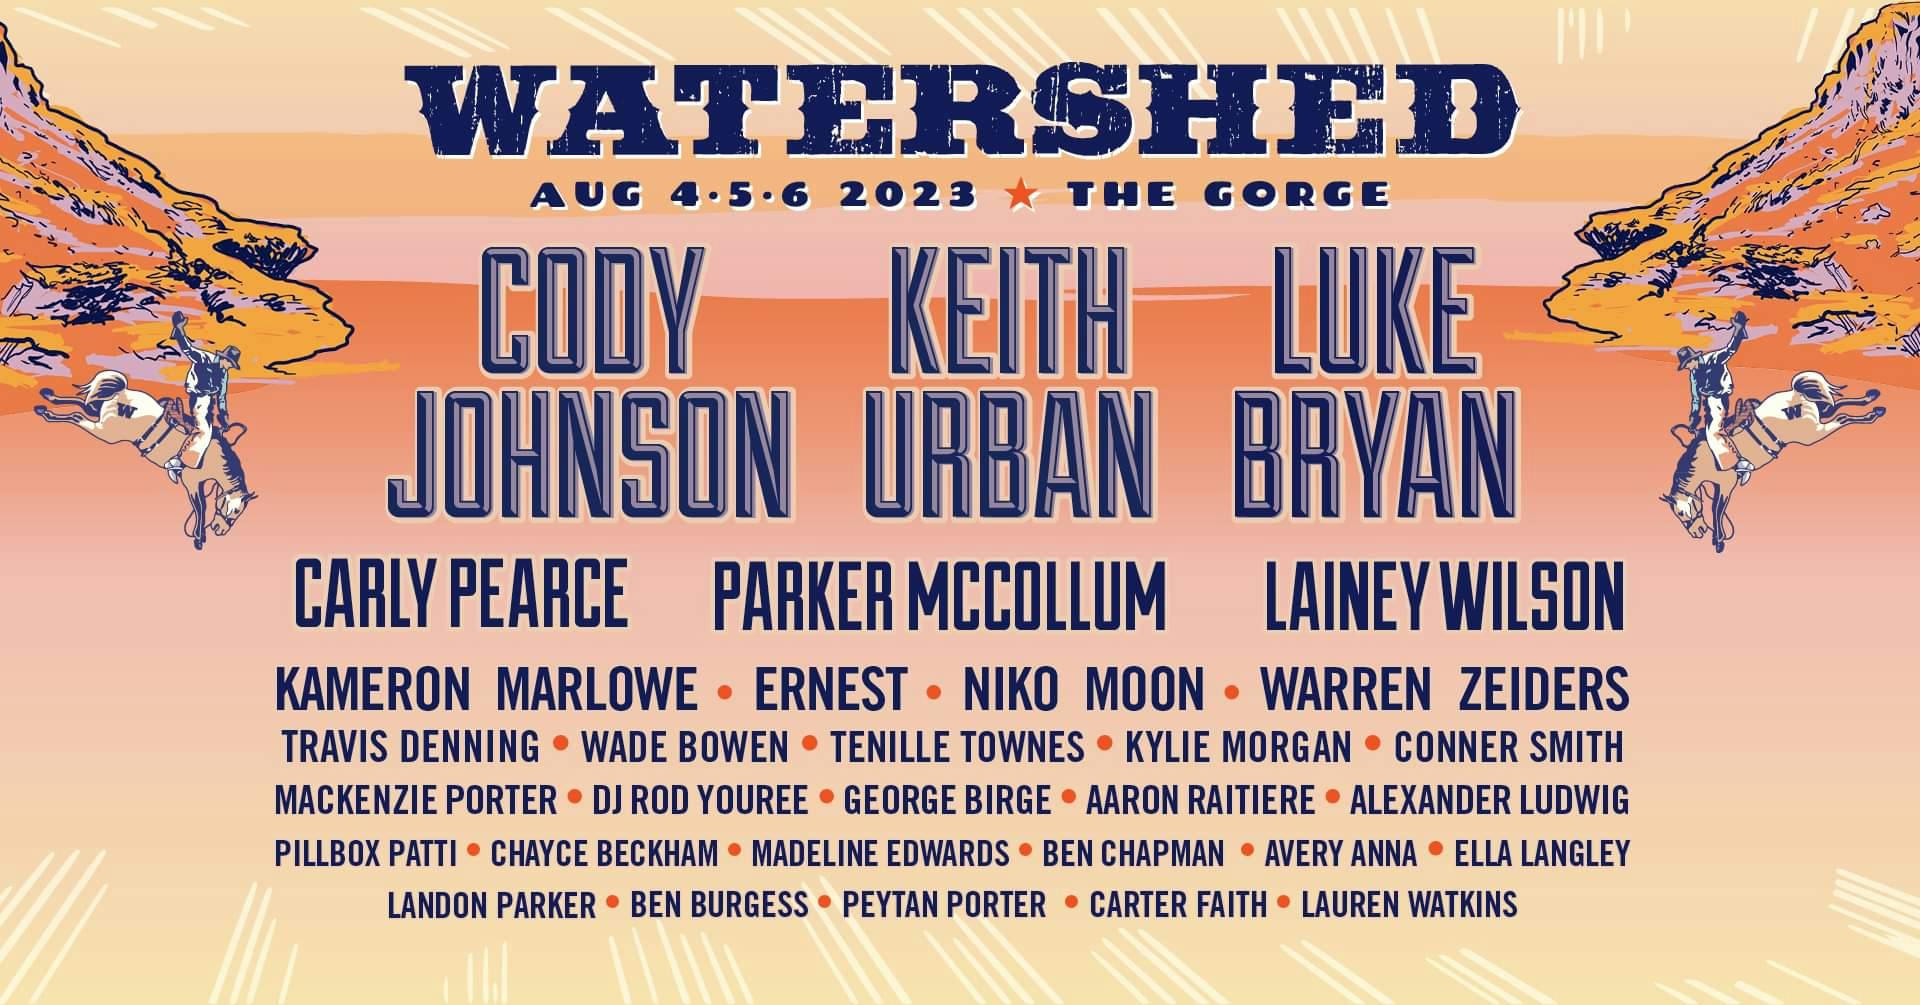 Watershed Festival 2023 Day 2 at Watershed Festival Saturday, Aug 5